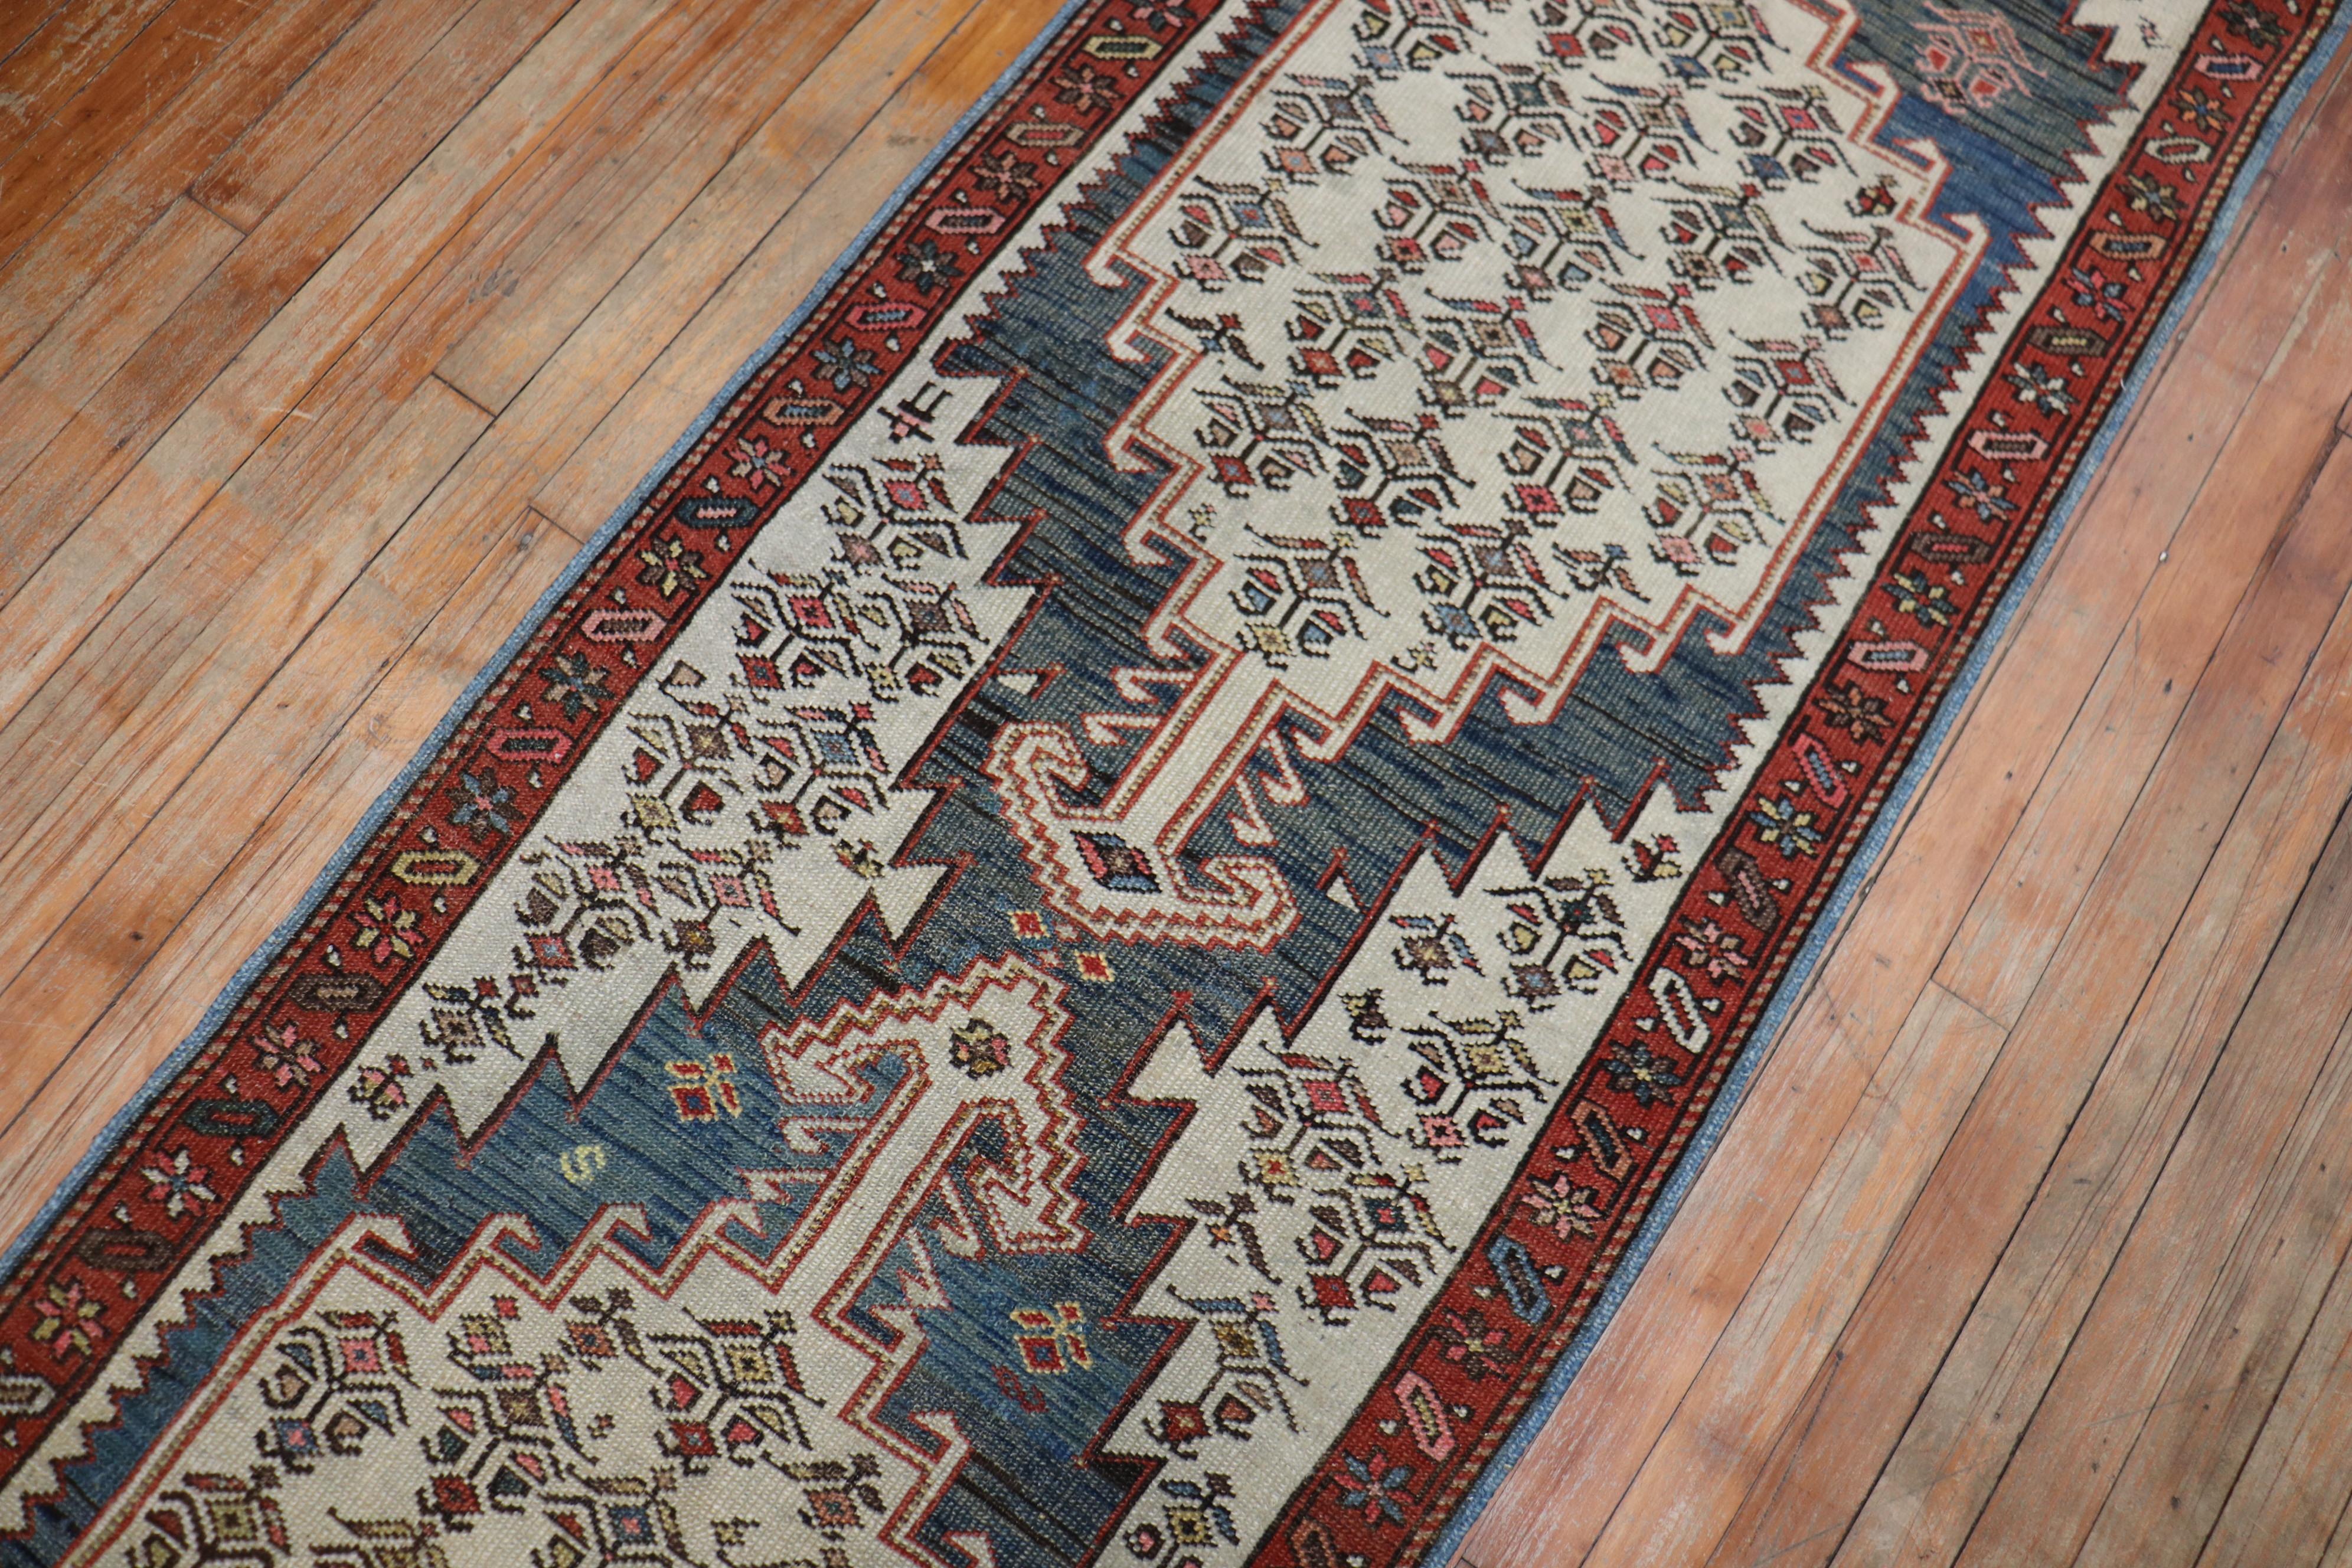 An early 20th century Narrow Tribal Northwest Persian Runner

Measures: 2'6